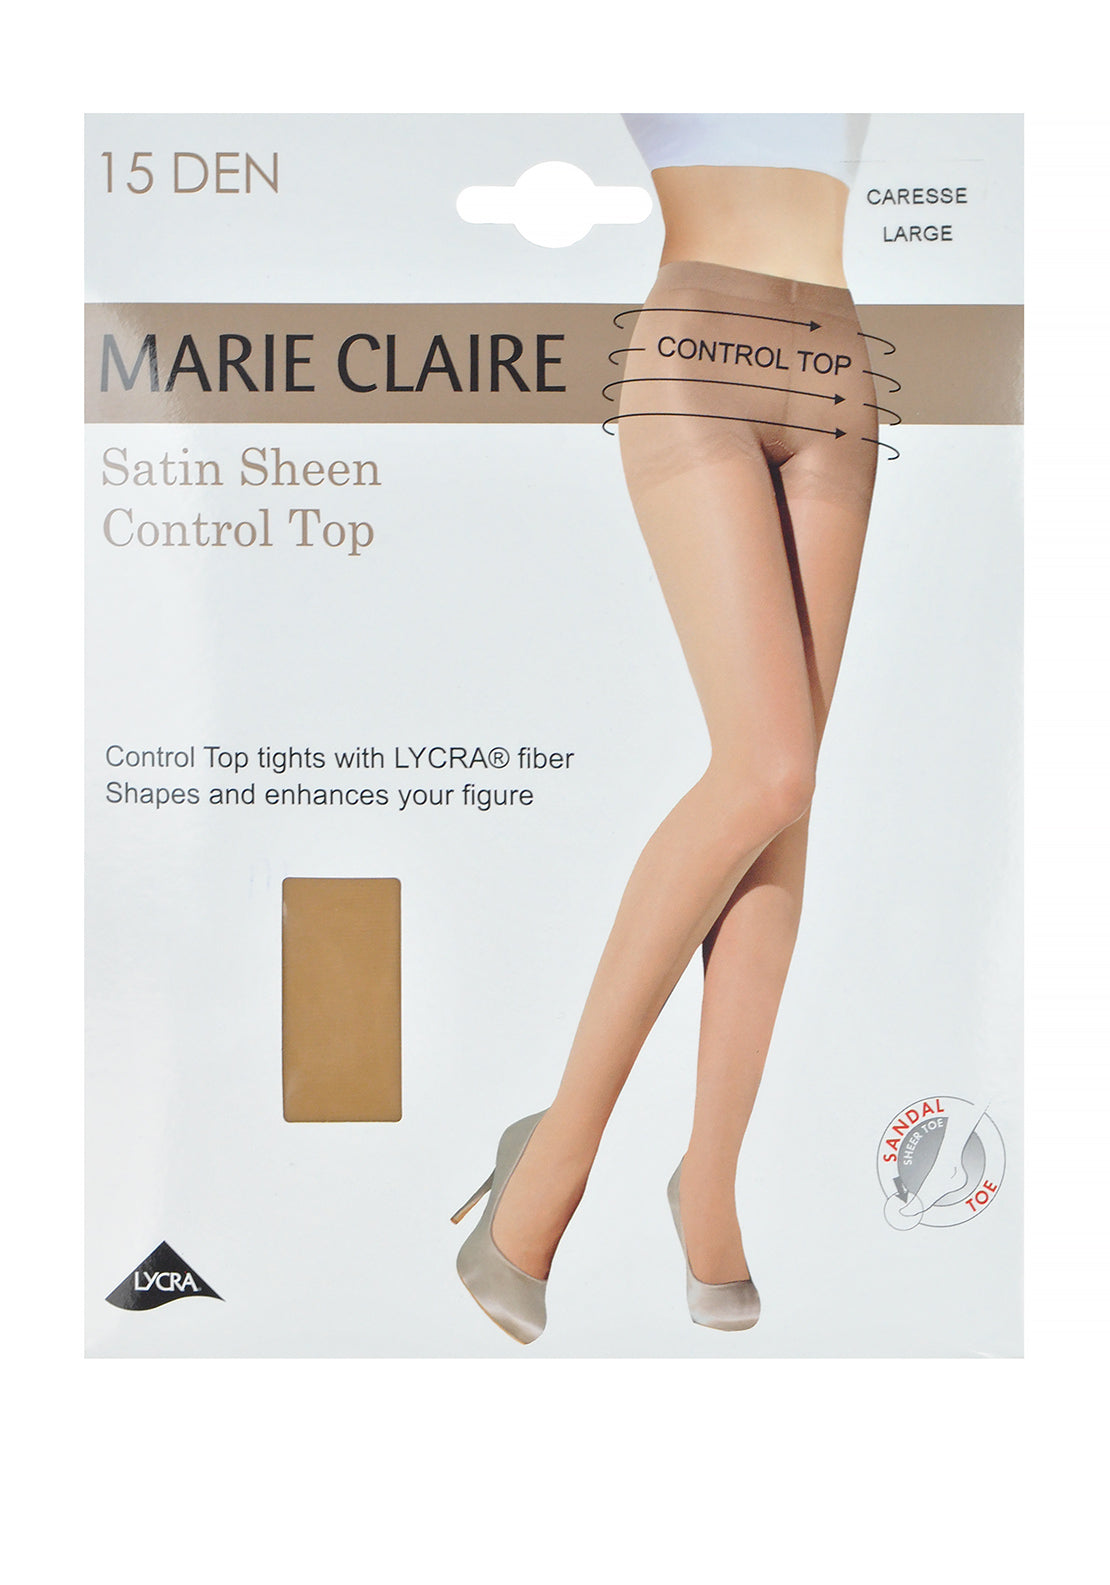 Couture Ultra Gloss Tights - Black Nude Natural Or Barely Black - Medum or  Large